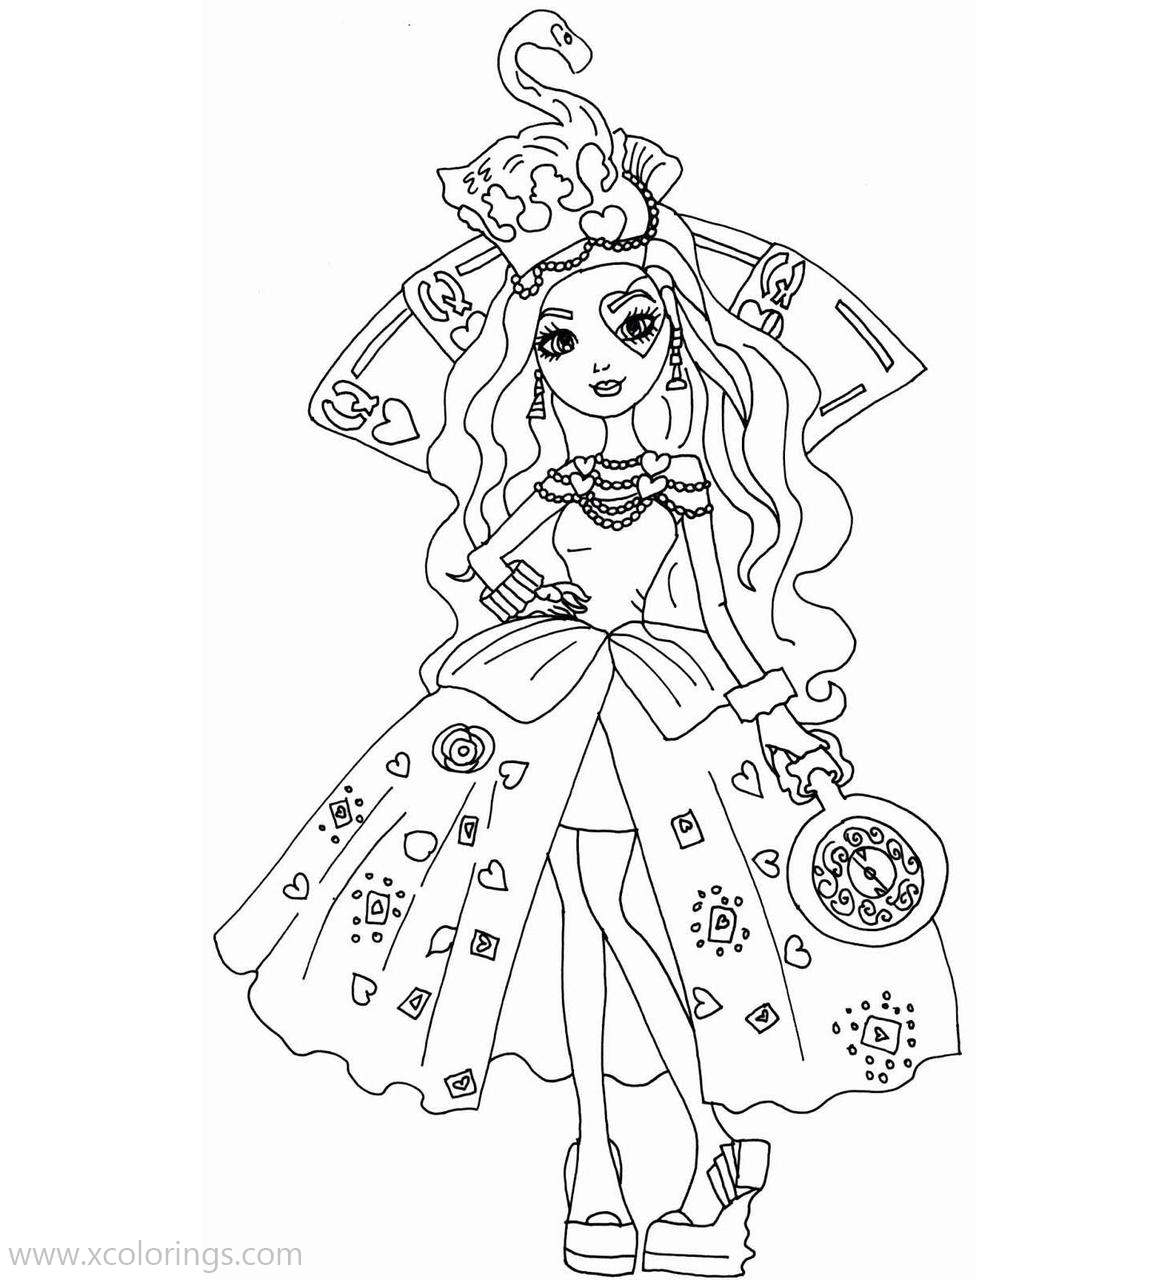 Free Duchess Swan from Ever After High Coloring Pages printable